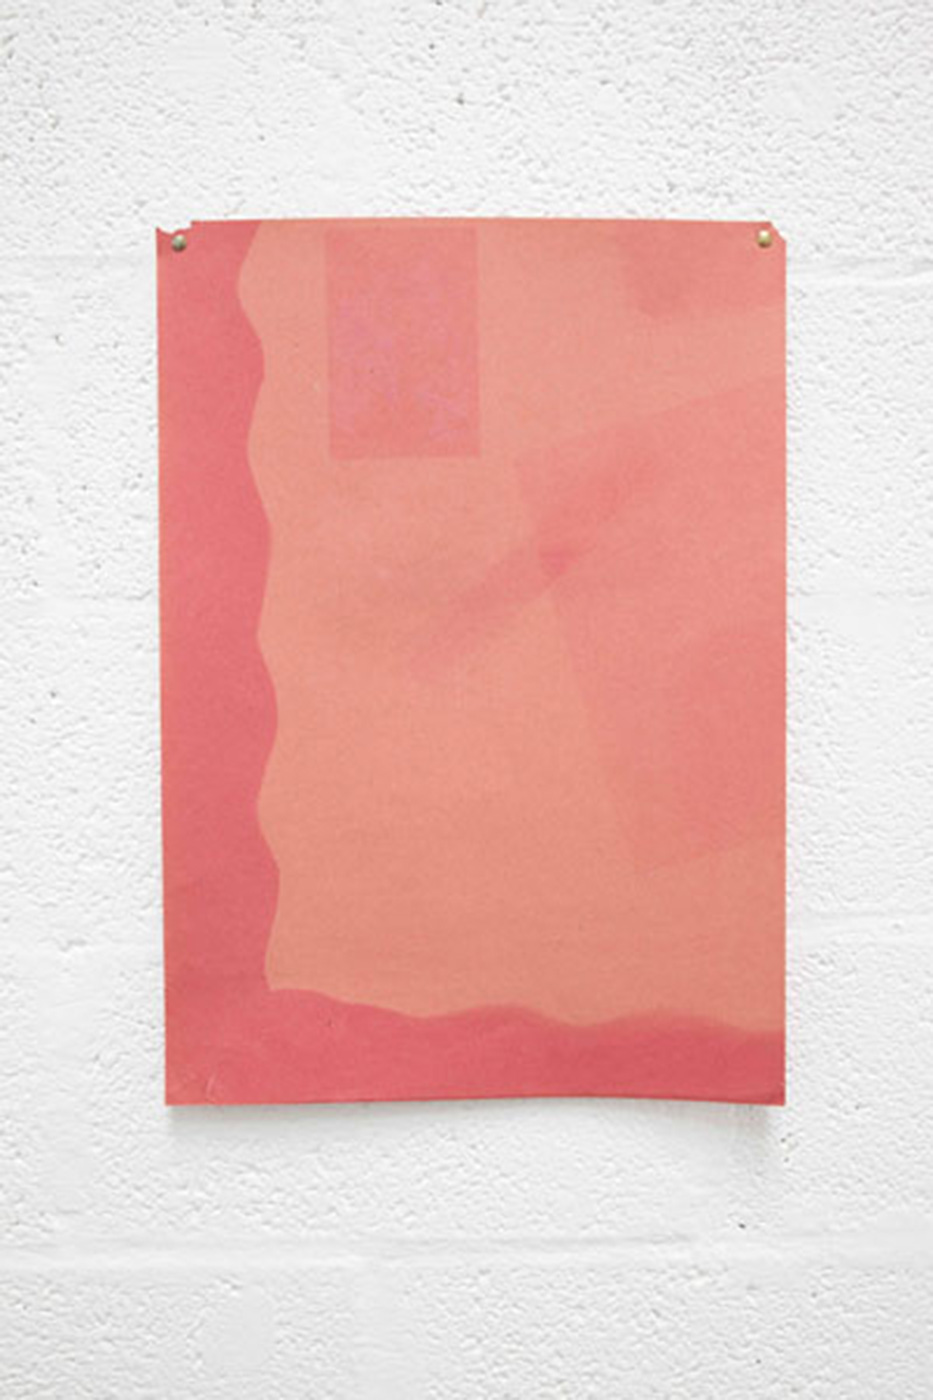 Faded Paper 46s, 2011